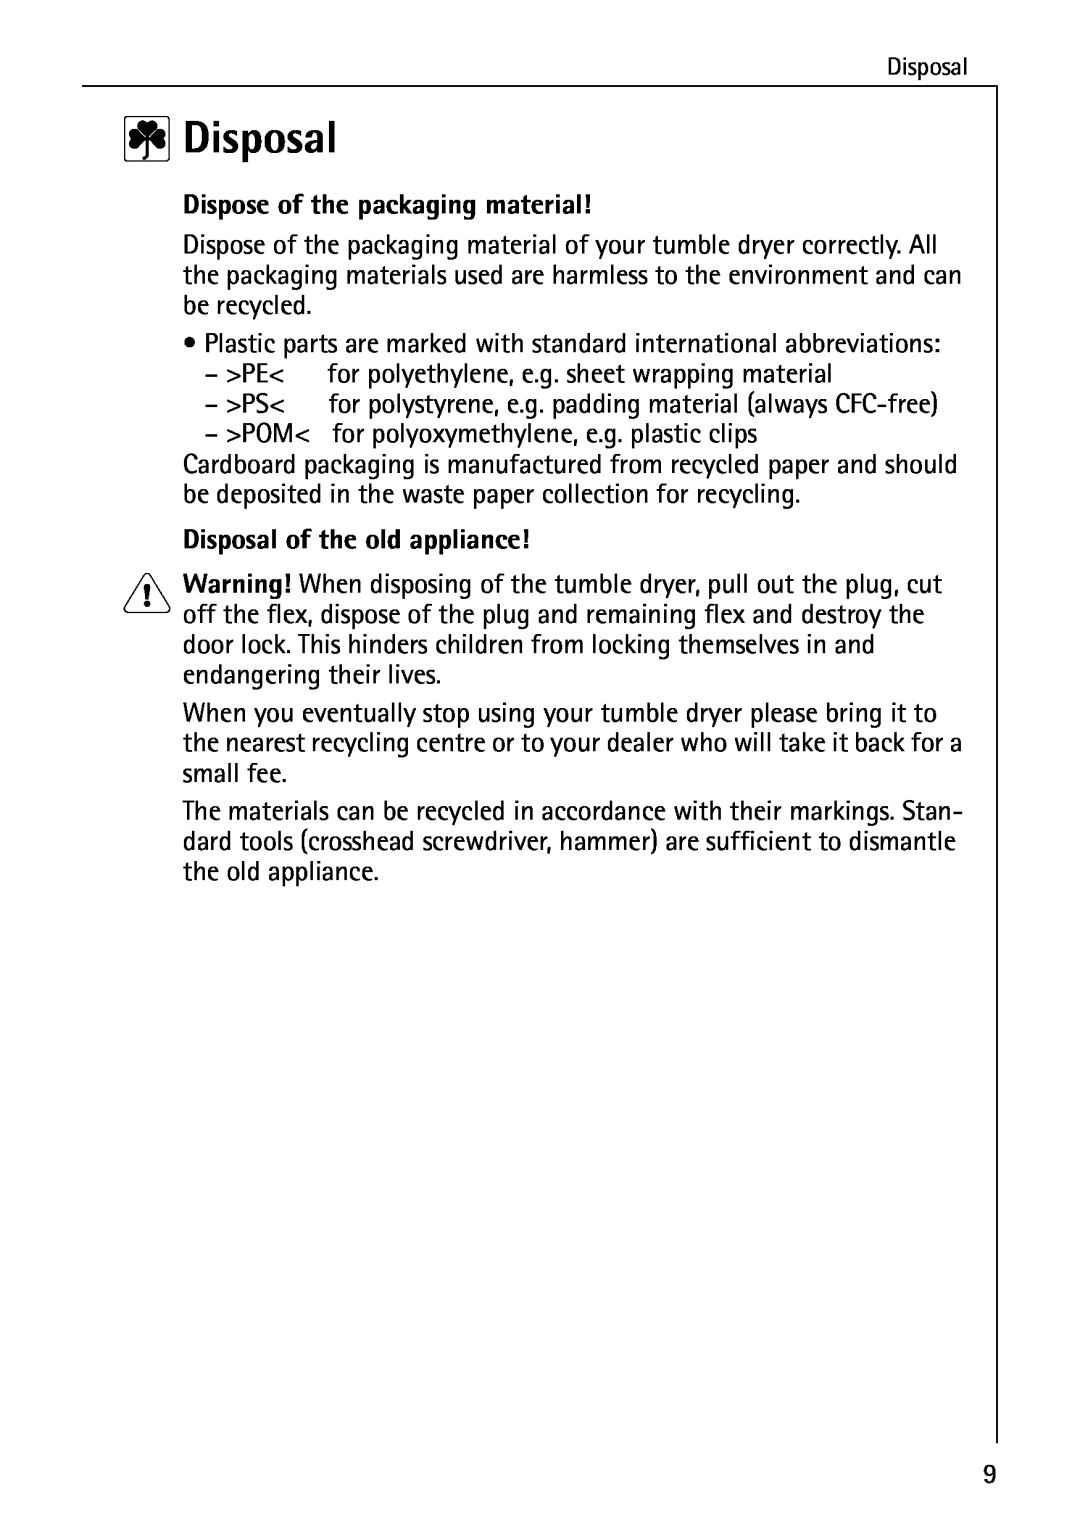 AEG 56609 operating instructions Dispose of the packaging material, Disposal of the old appliance 